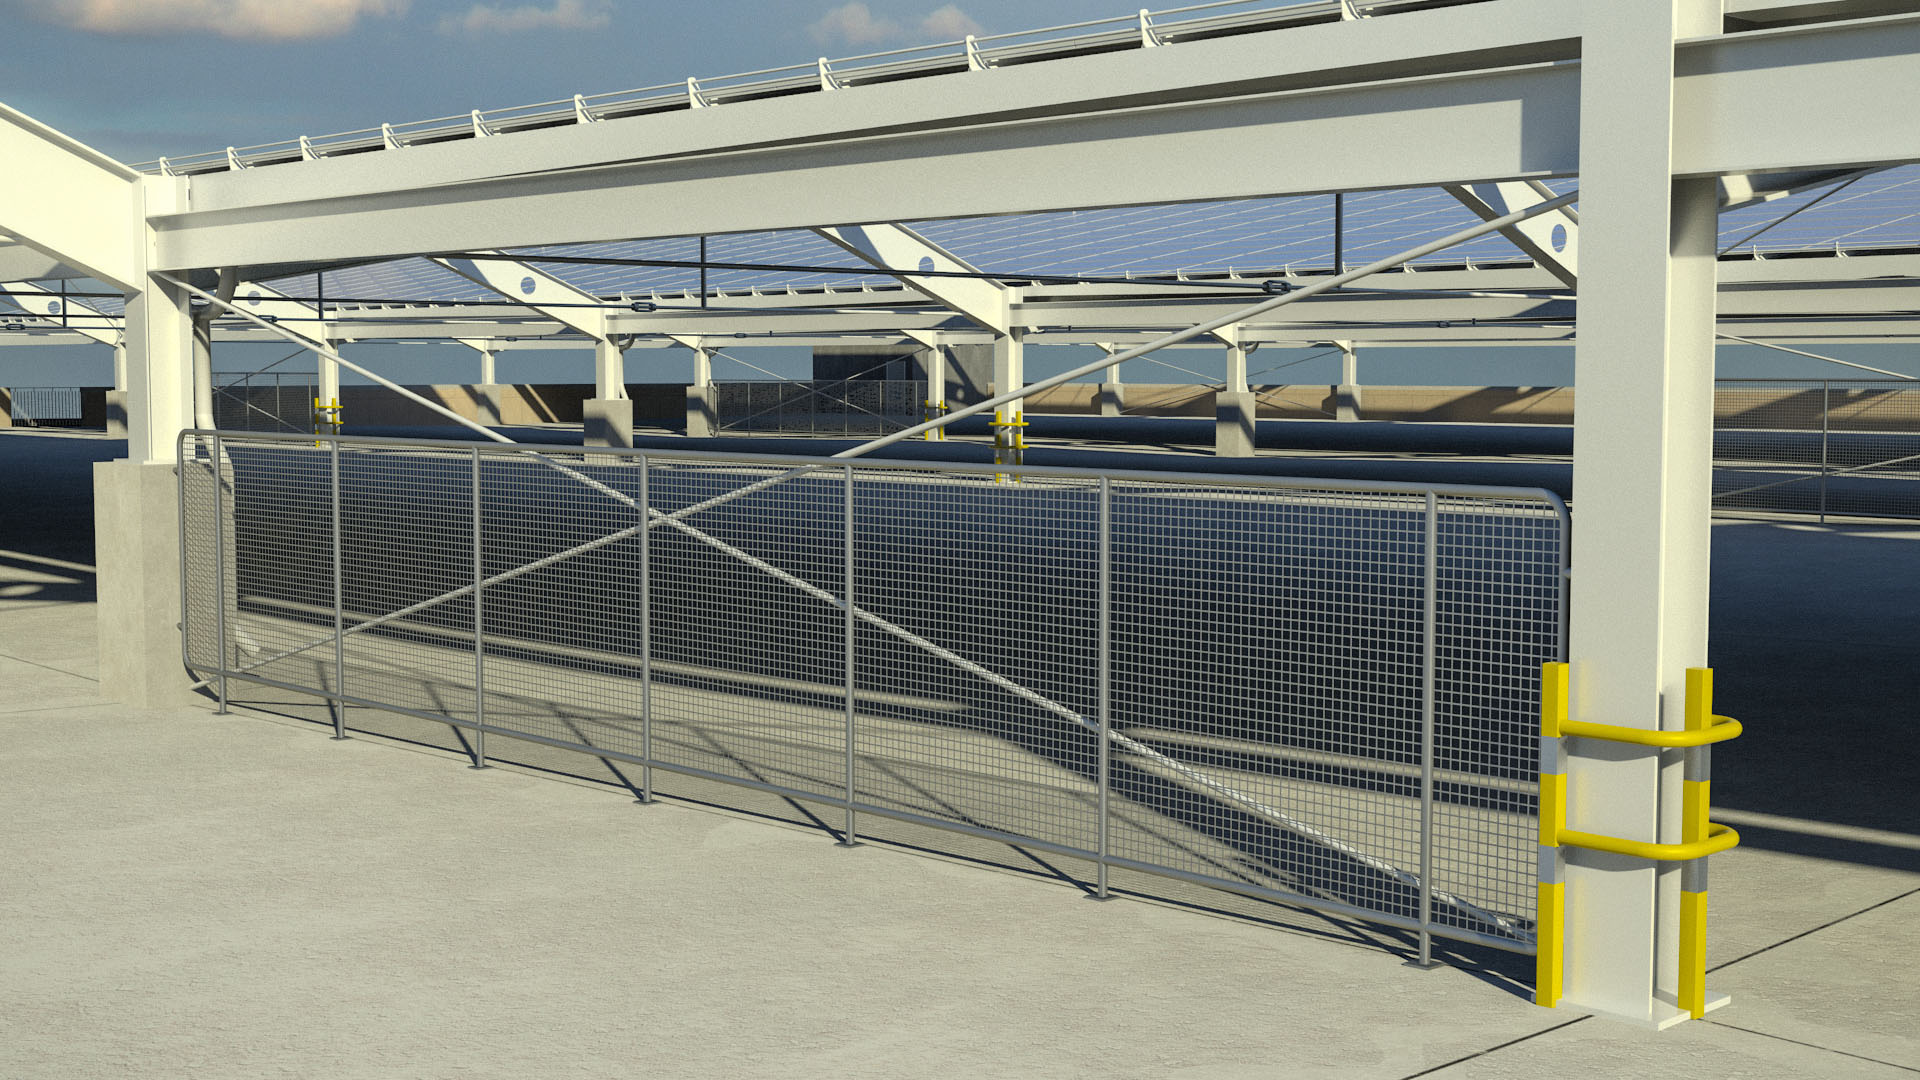 Greenhouse gas 3D rendering of the photovoltaic solar array power system to be installed by Hatch at the New Oakville Hospital in Oakville, Ontario, Canada. (CNW Group/HATCH) | (CNW Group - HATCH)